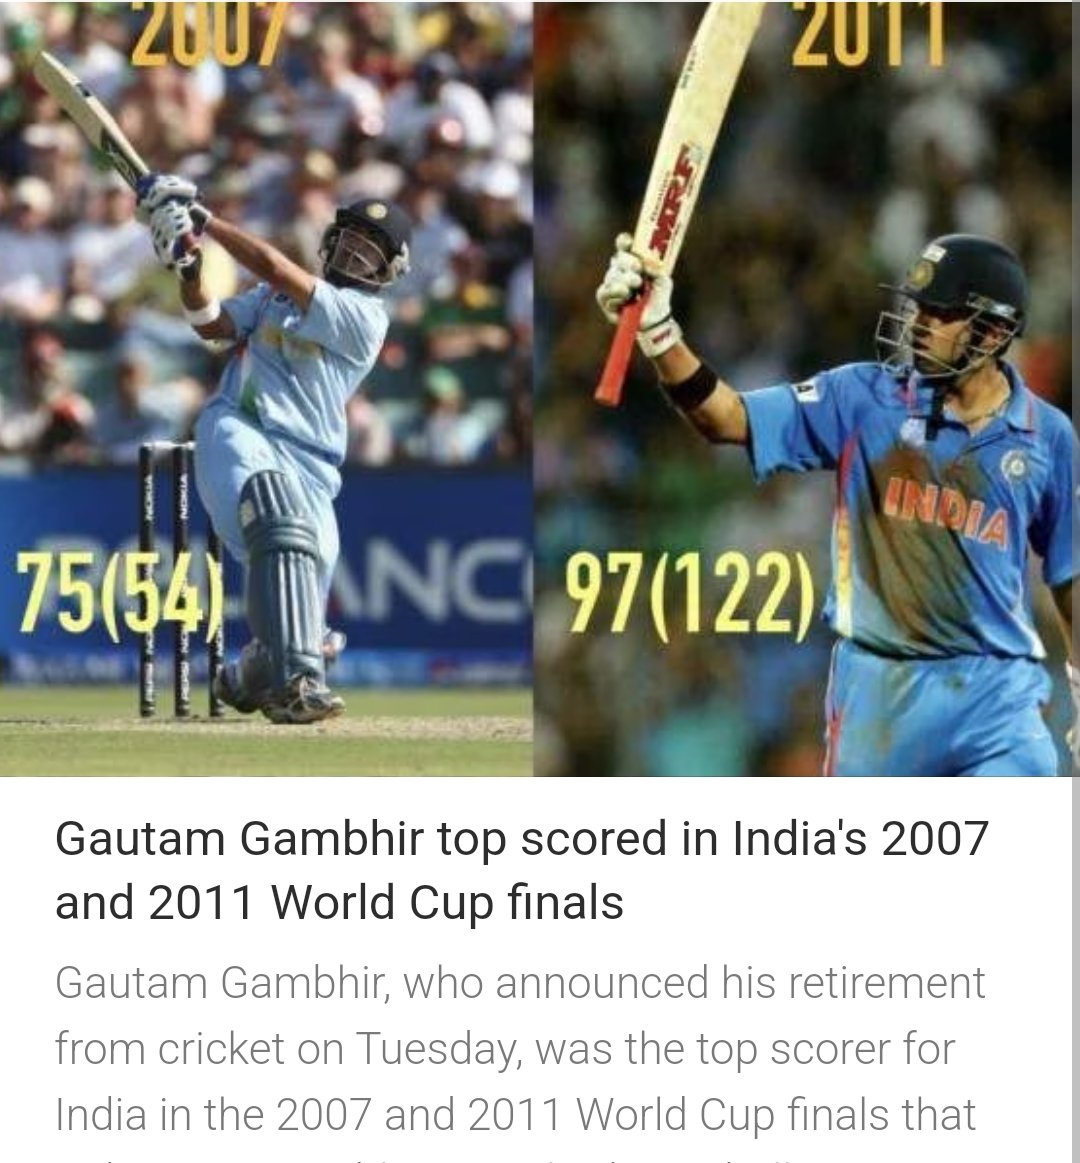 Gautam Gambhir can cry out loud every time. But he knows Dhoni brought him back to the team.